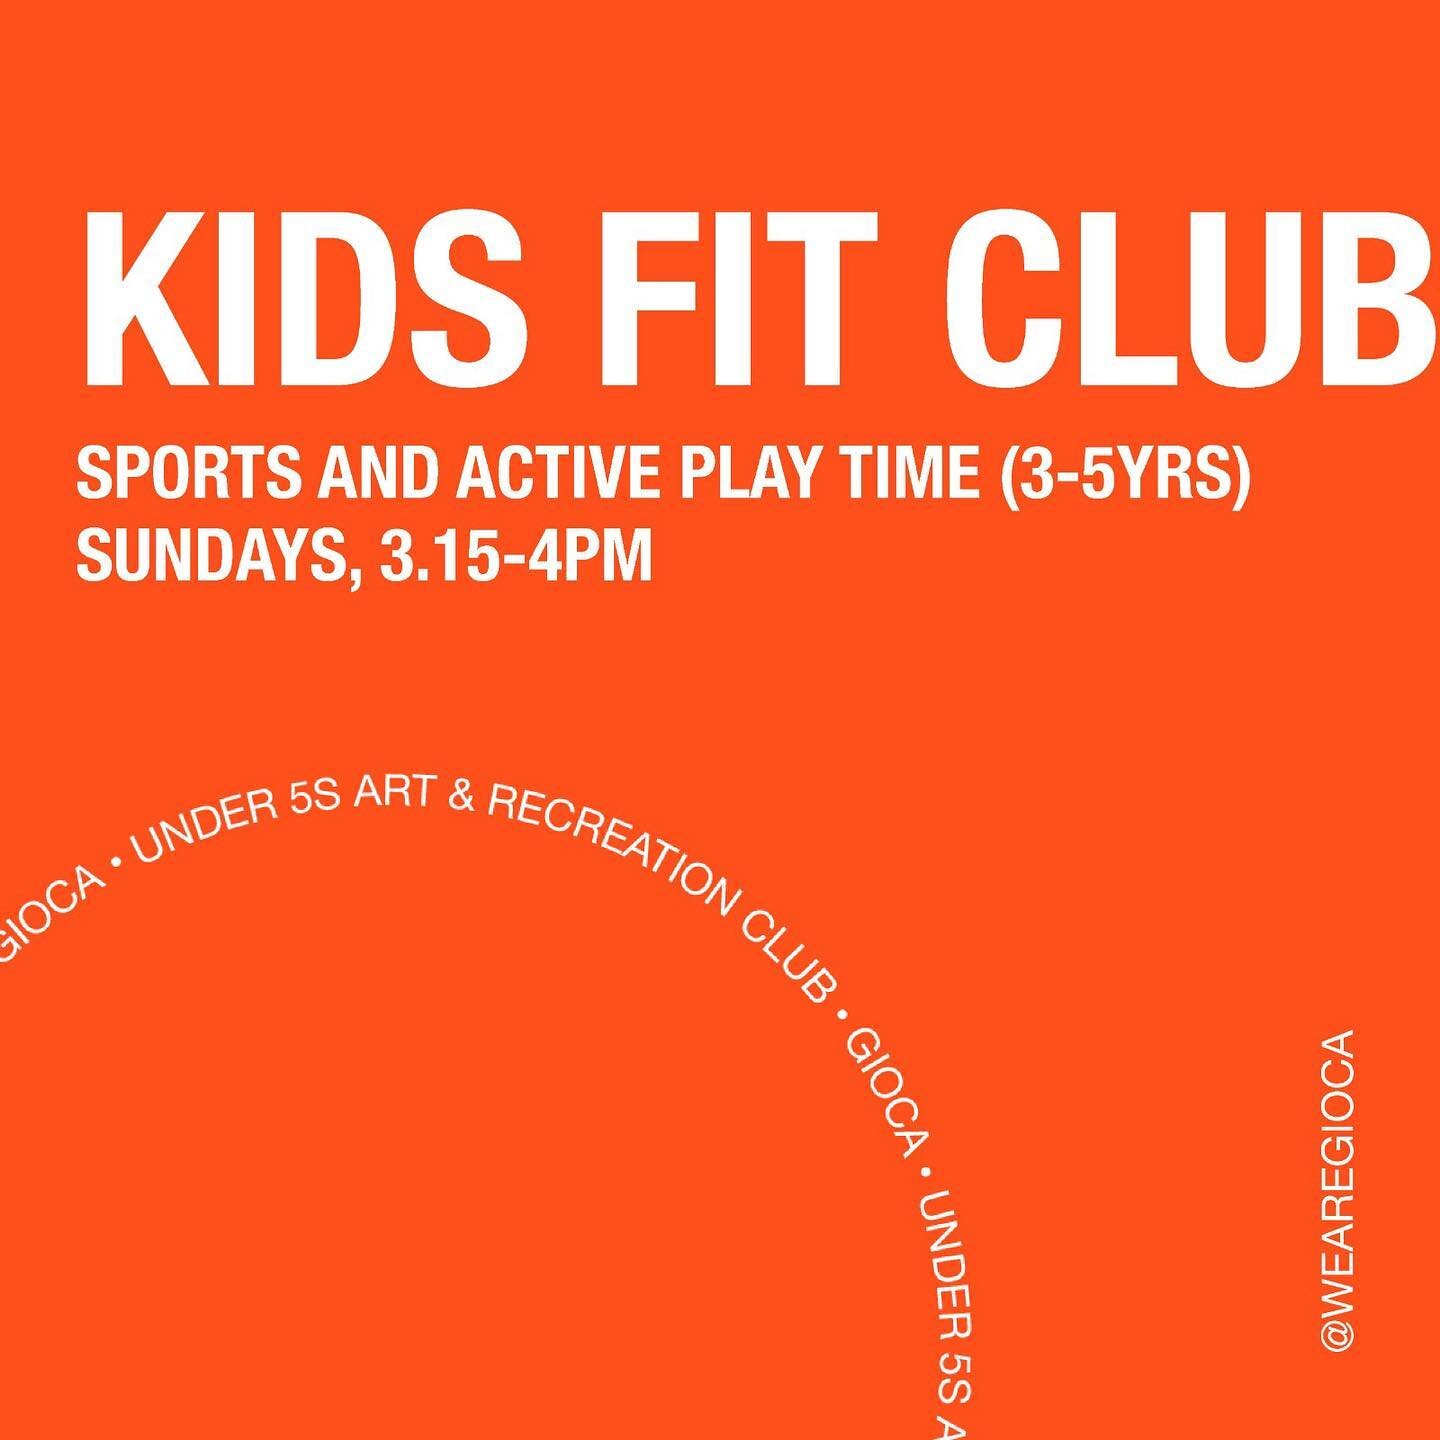 Let's do it 💪🏽

Alongside a session geared toward little ones, we're also proposing a session with @kidsfitclub_london that&rsquo;s catered to slighly older kiddos (3-5yrs).

Kids Fit Club &mdash; Sports and Active Play Time (3-5yrs) offers inclusi